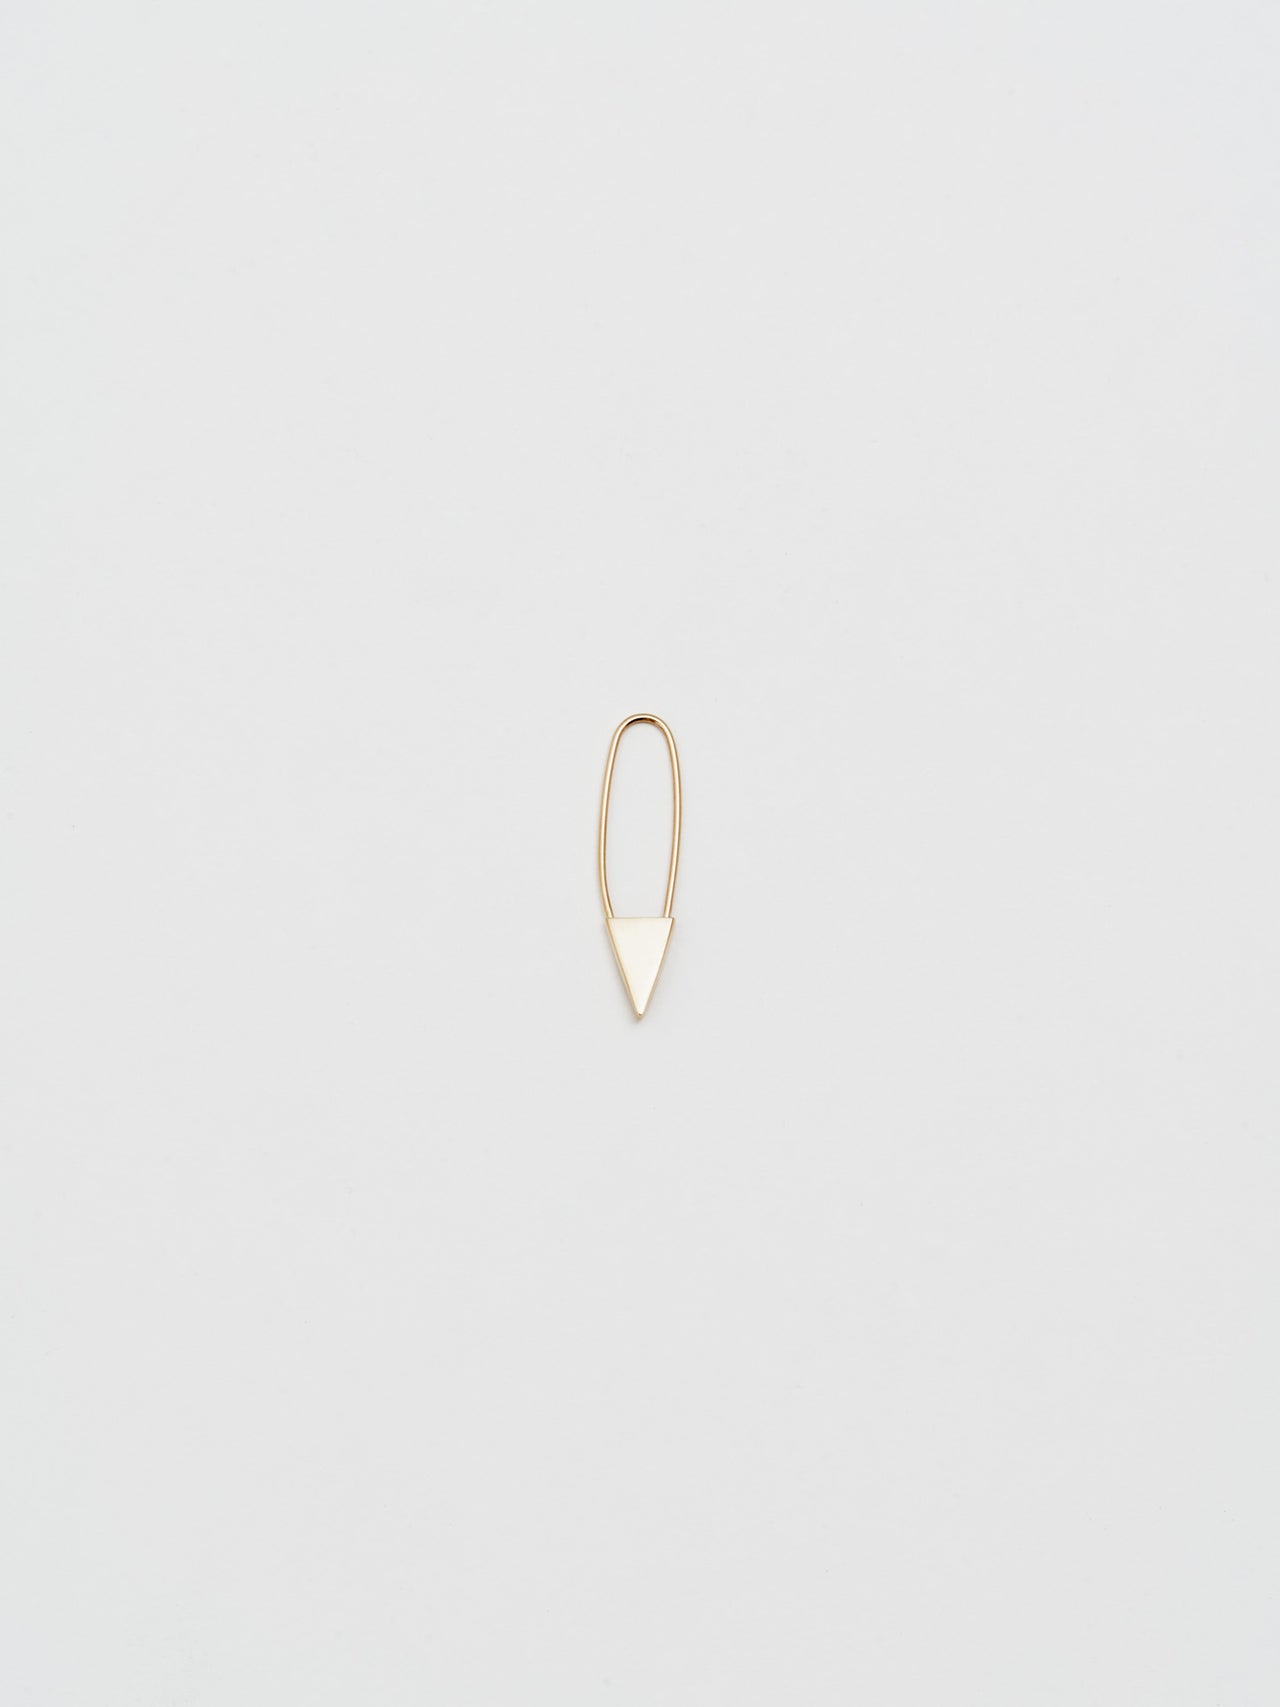 Mini Triangle Safety Pin Earring in Yellow Gold, light grey background.